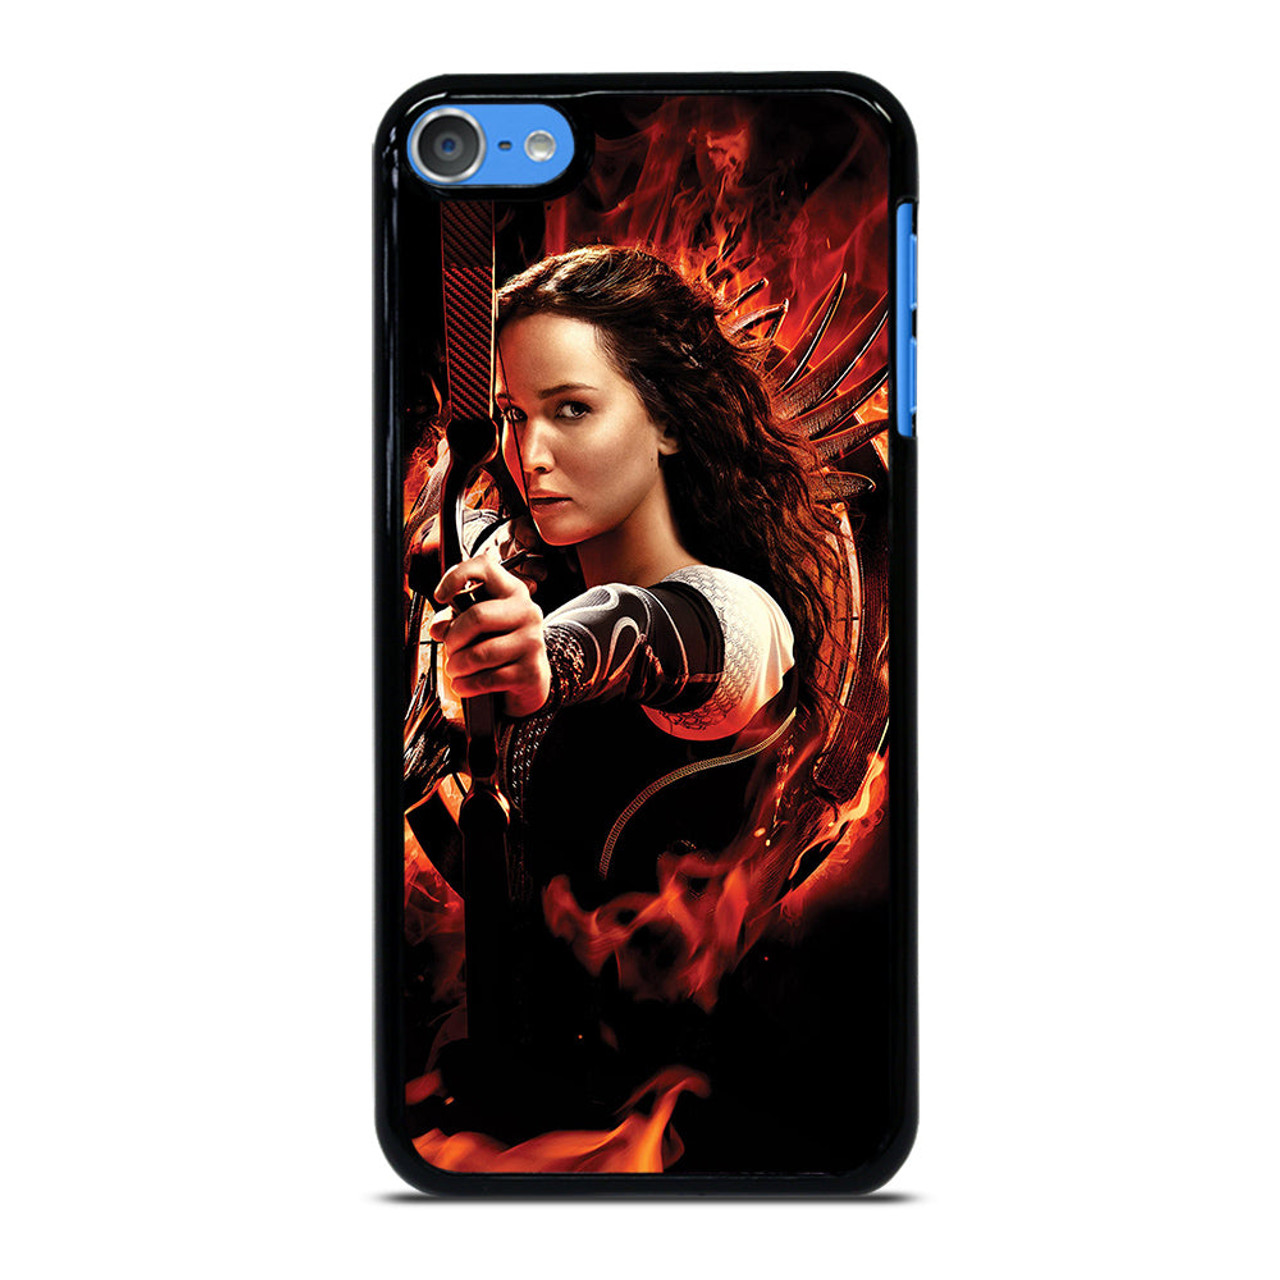 catching fire ipod case